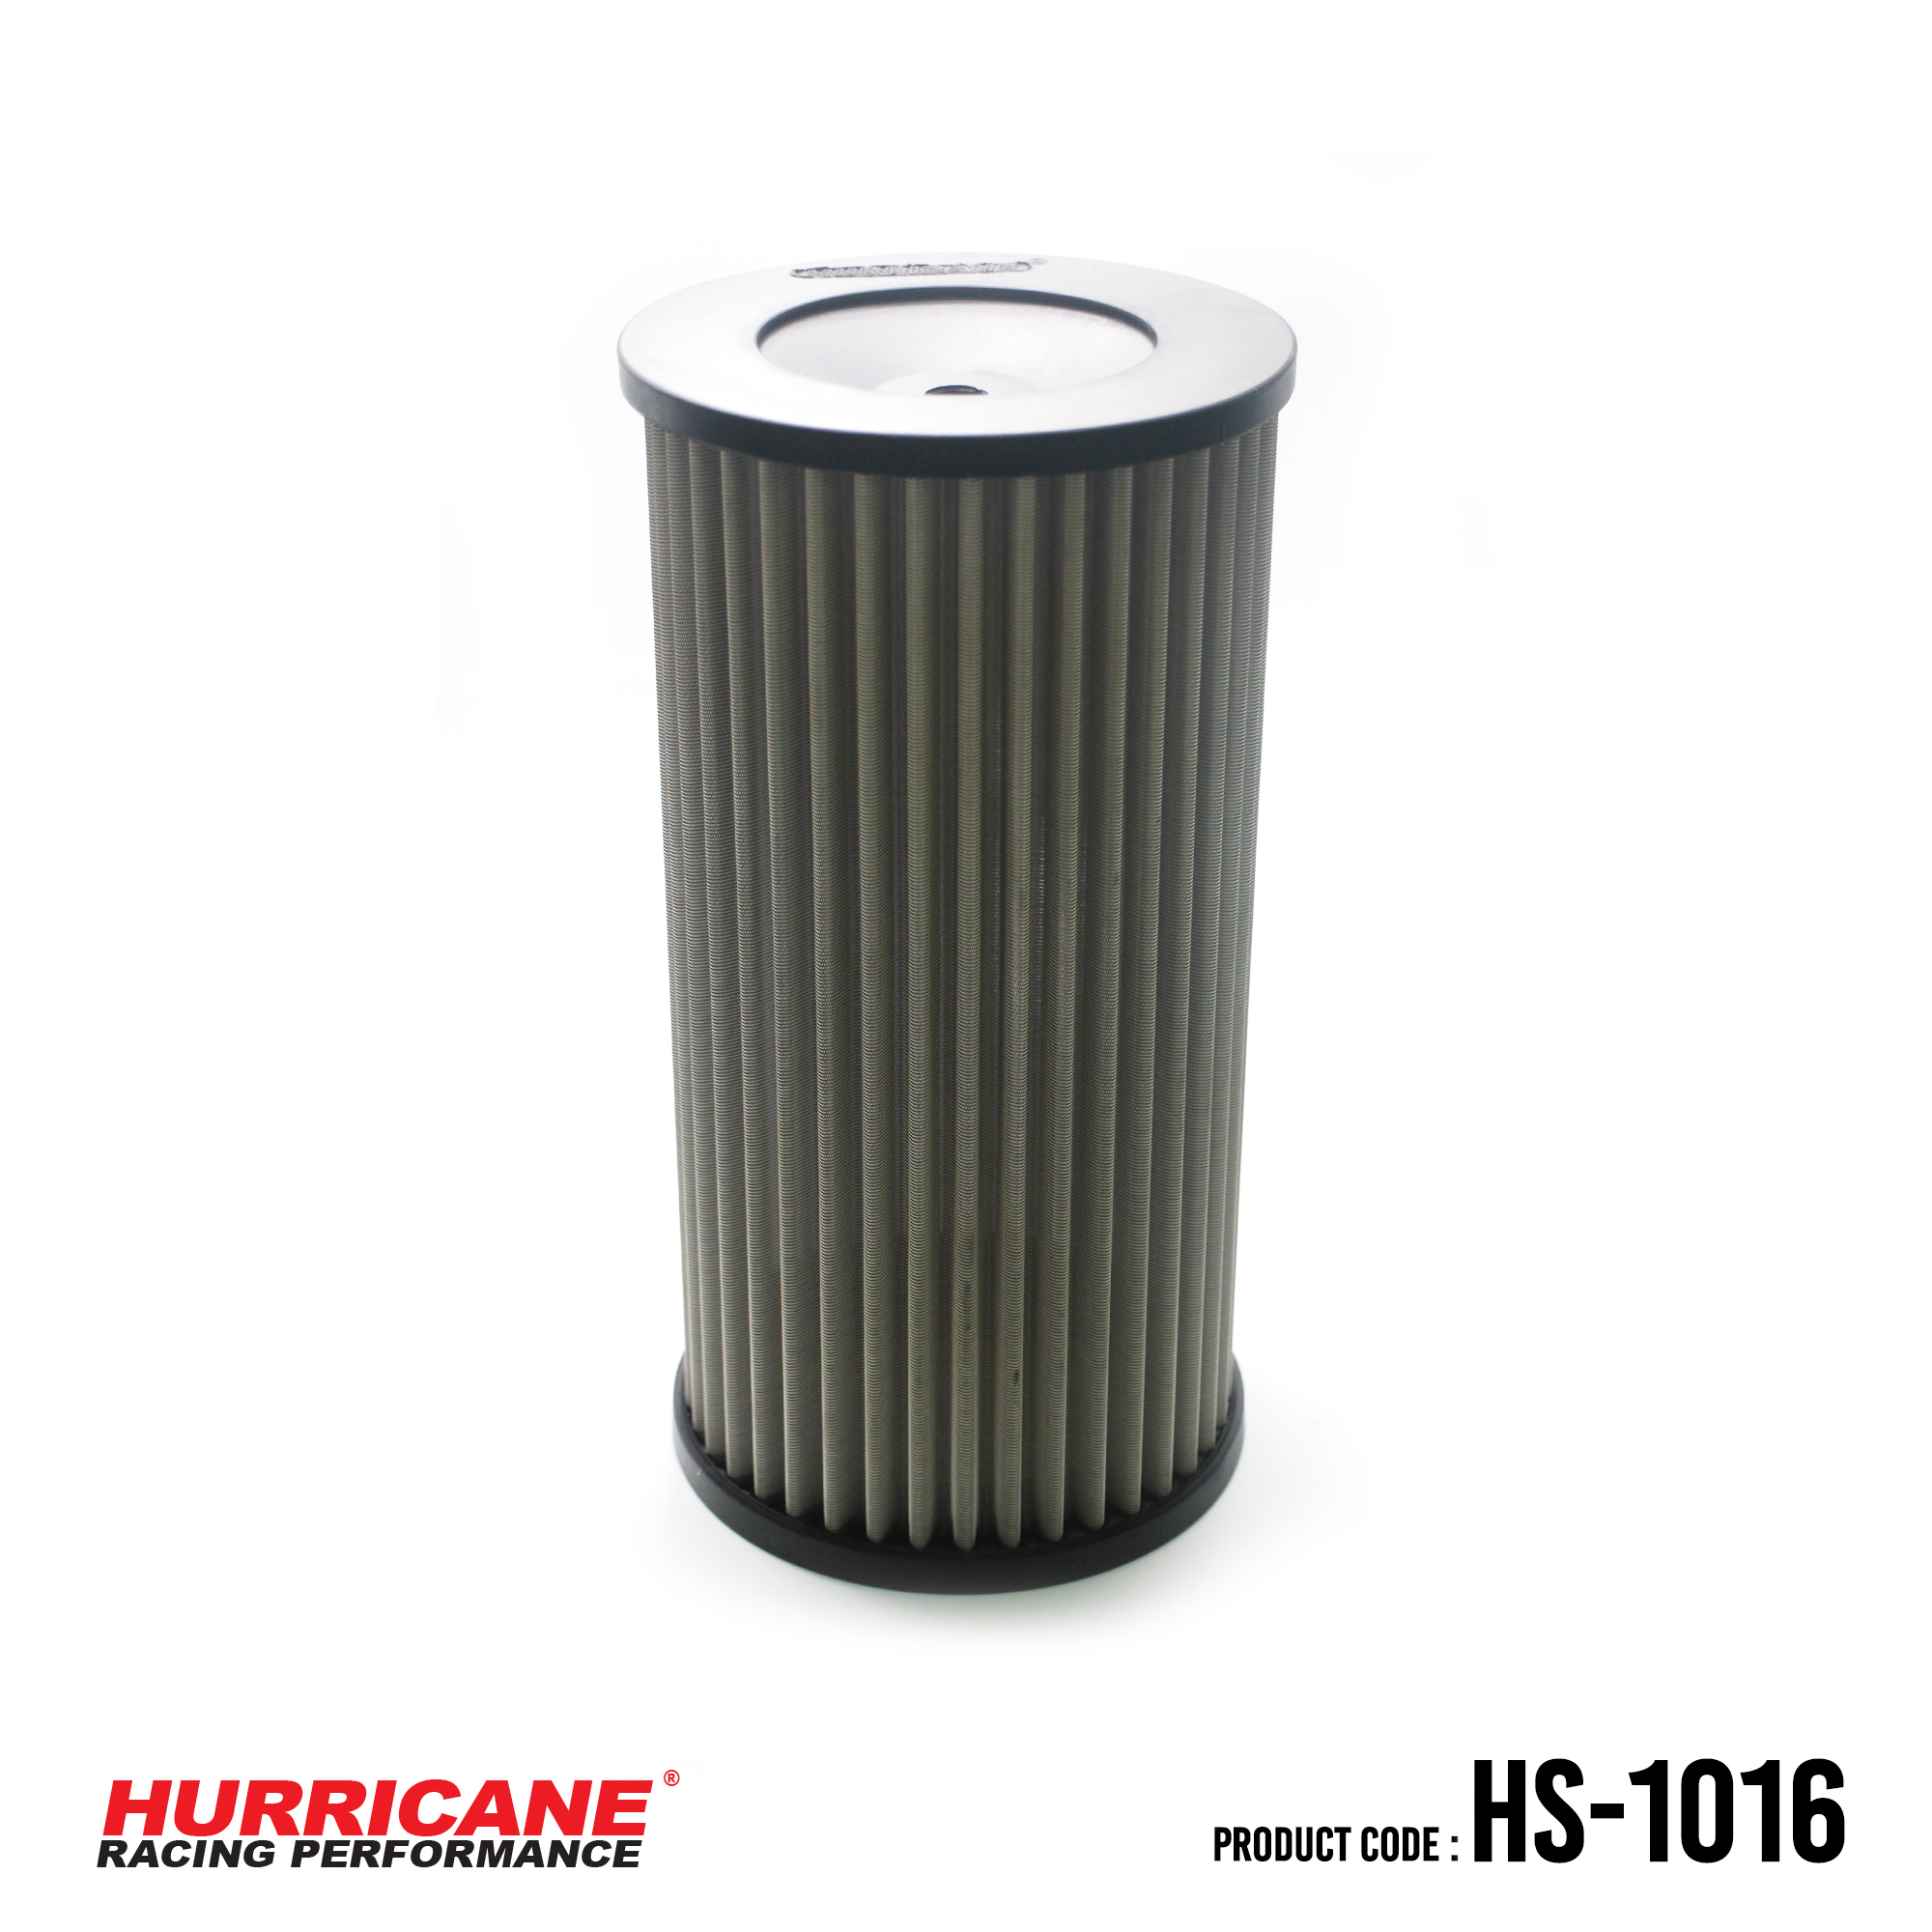 HURRICANE STAINLESS STEEL AIR FILTER FOR HS-1016 Toyota